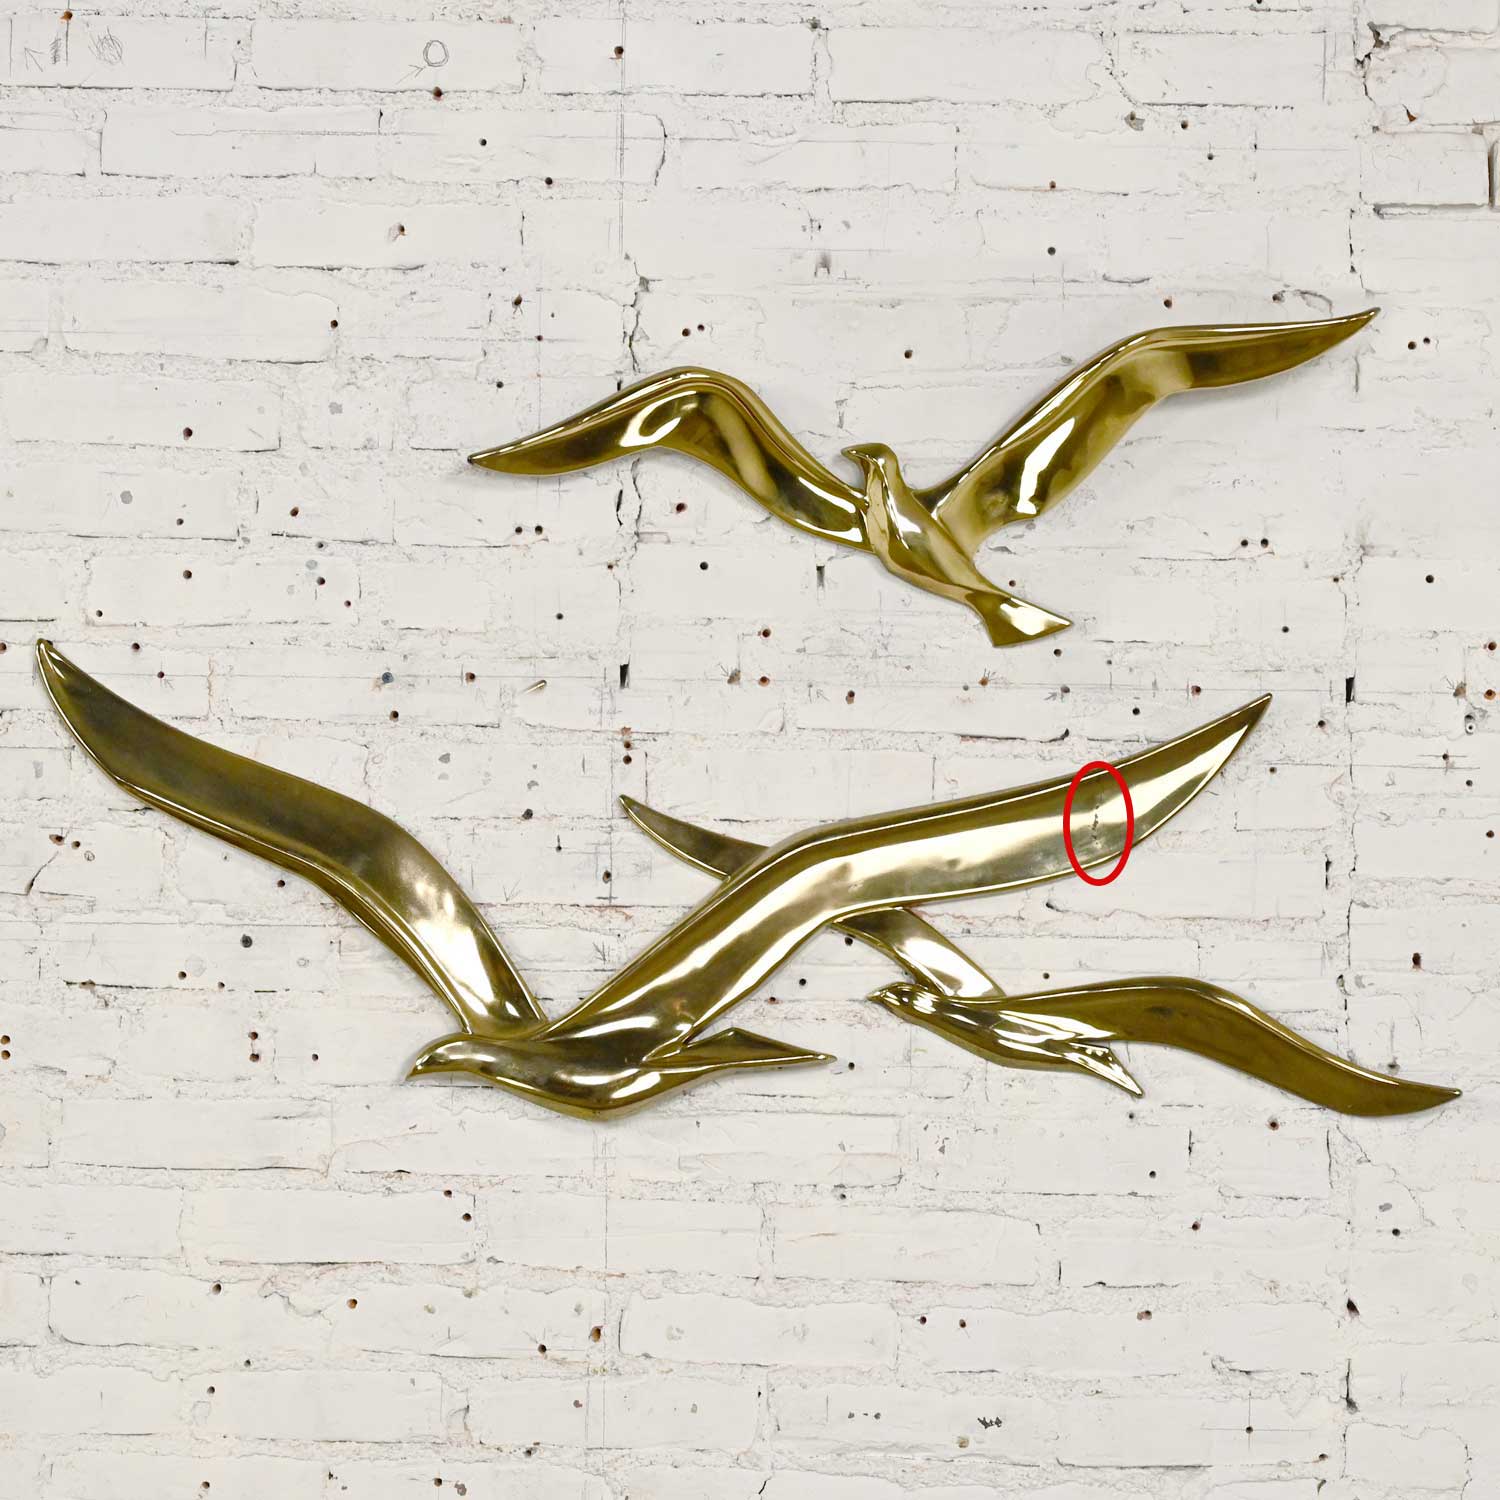 Vintage Mid-Century Modern Gilded Plastic Seagulls in Flight Birds 2 Piece Wall Sculpture by Syroco